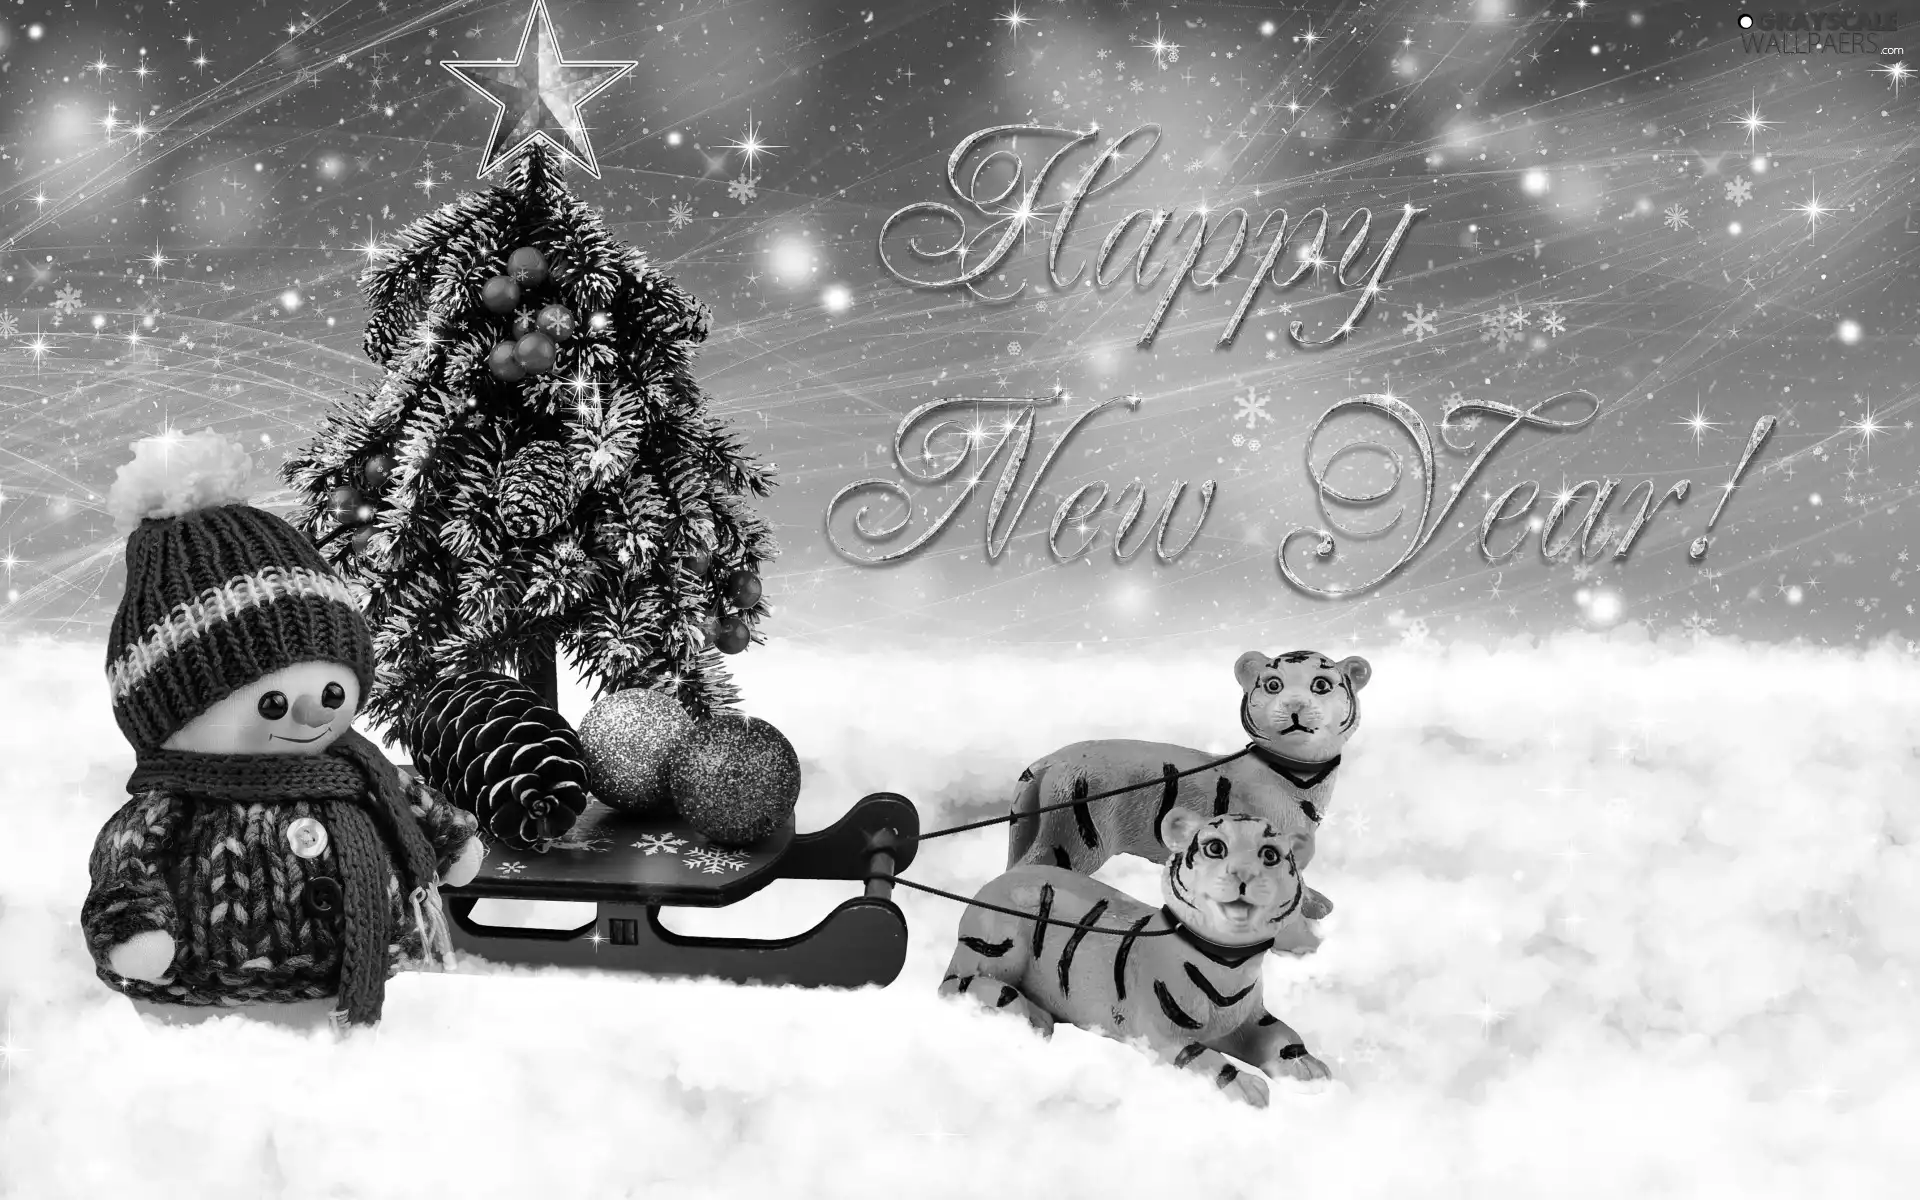 cone, text, sleigh, tigress, christmas tree, New Year, happy new year, Snowman, Two cars, baubles